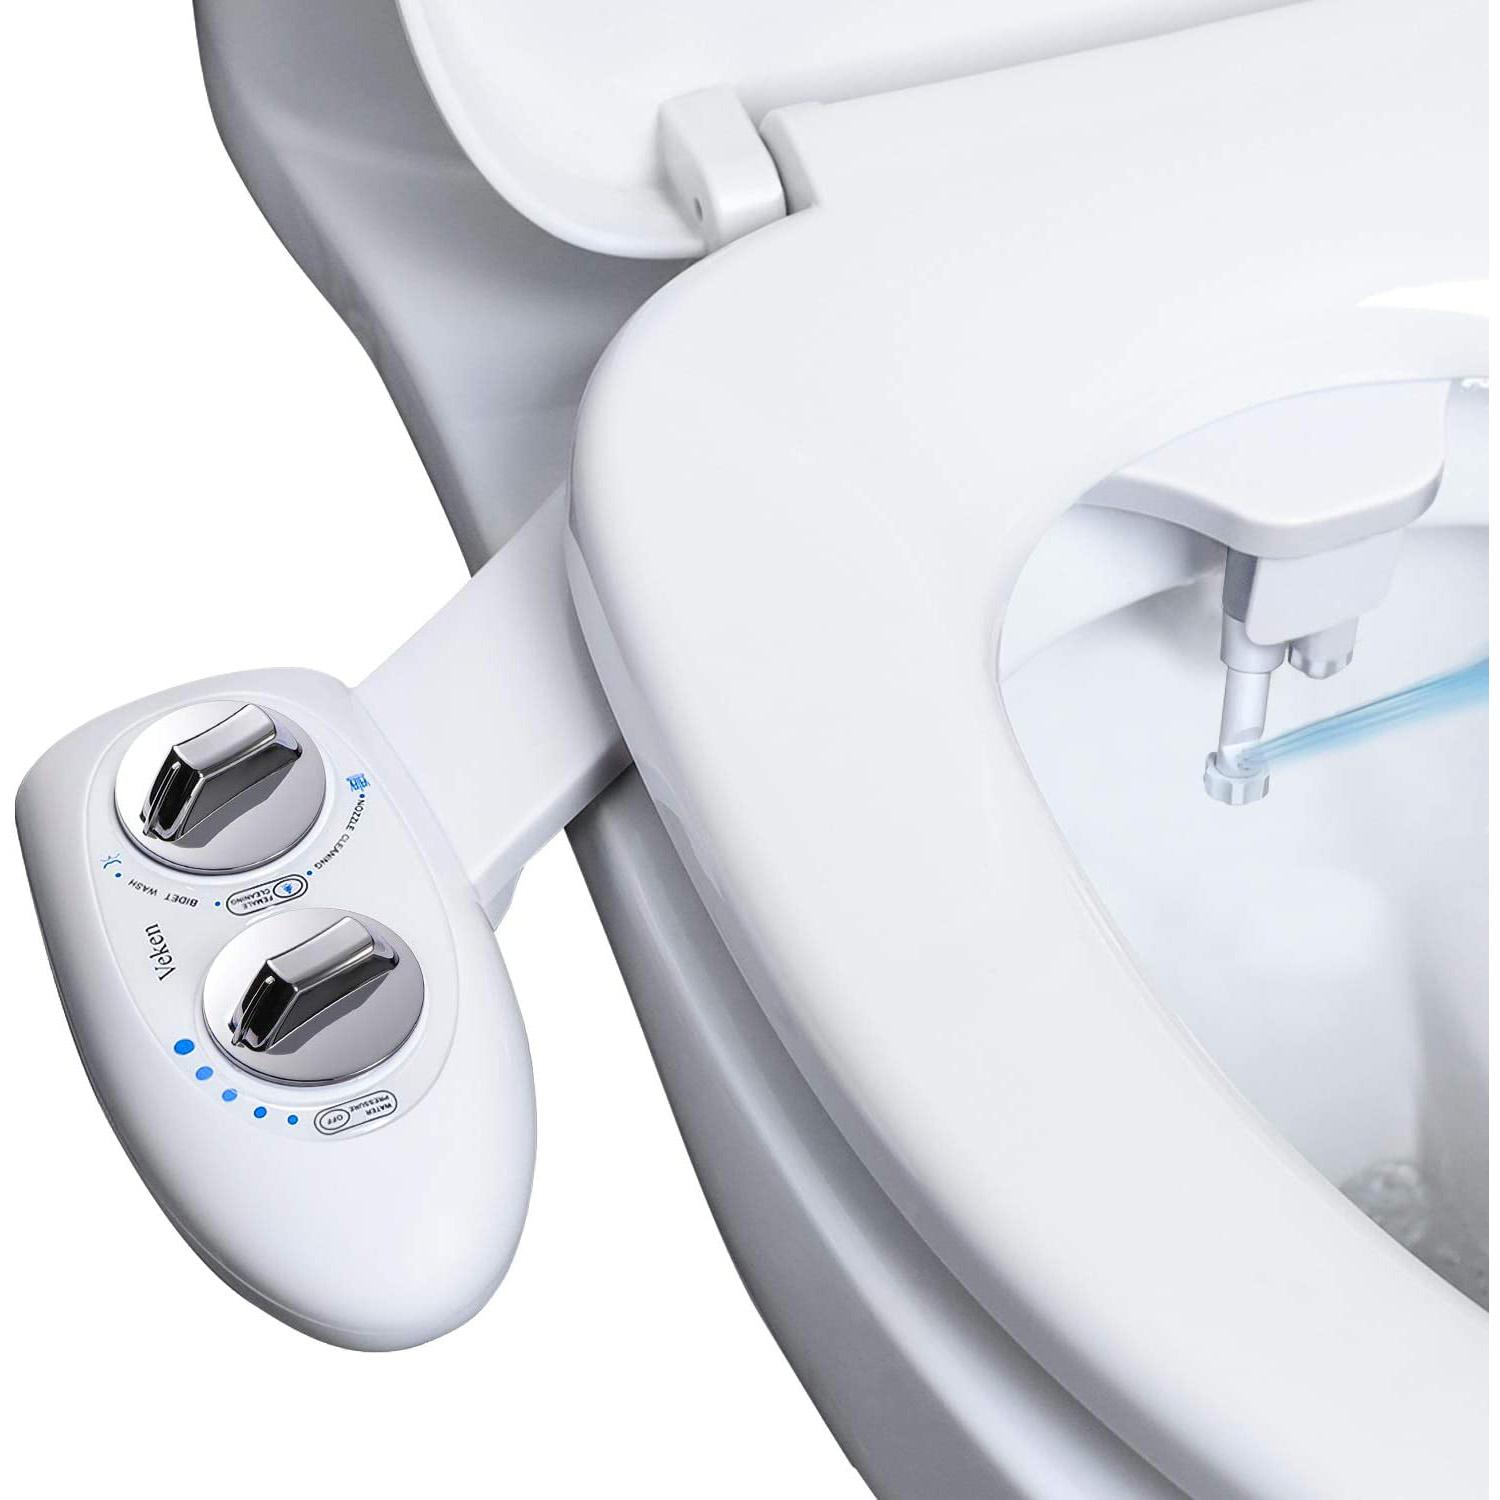 Veken Non-Electric Bidet Self-Cleaning Toilet Water Pressure for $29.99 Shipped